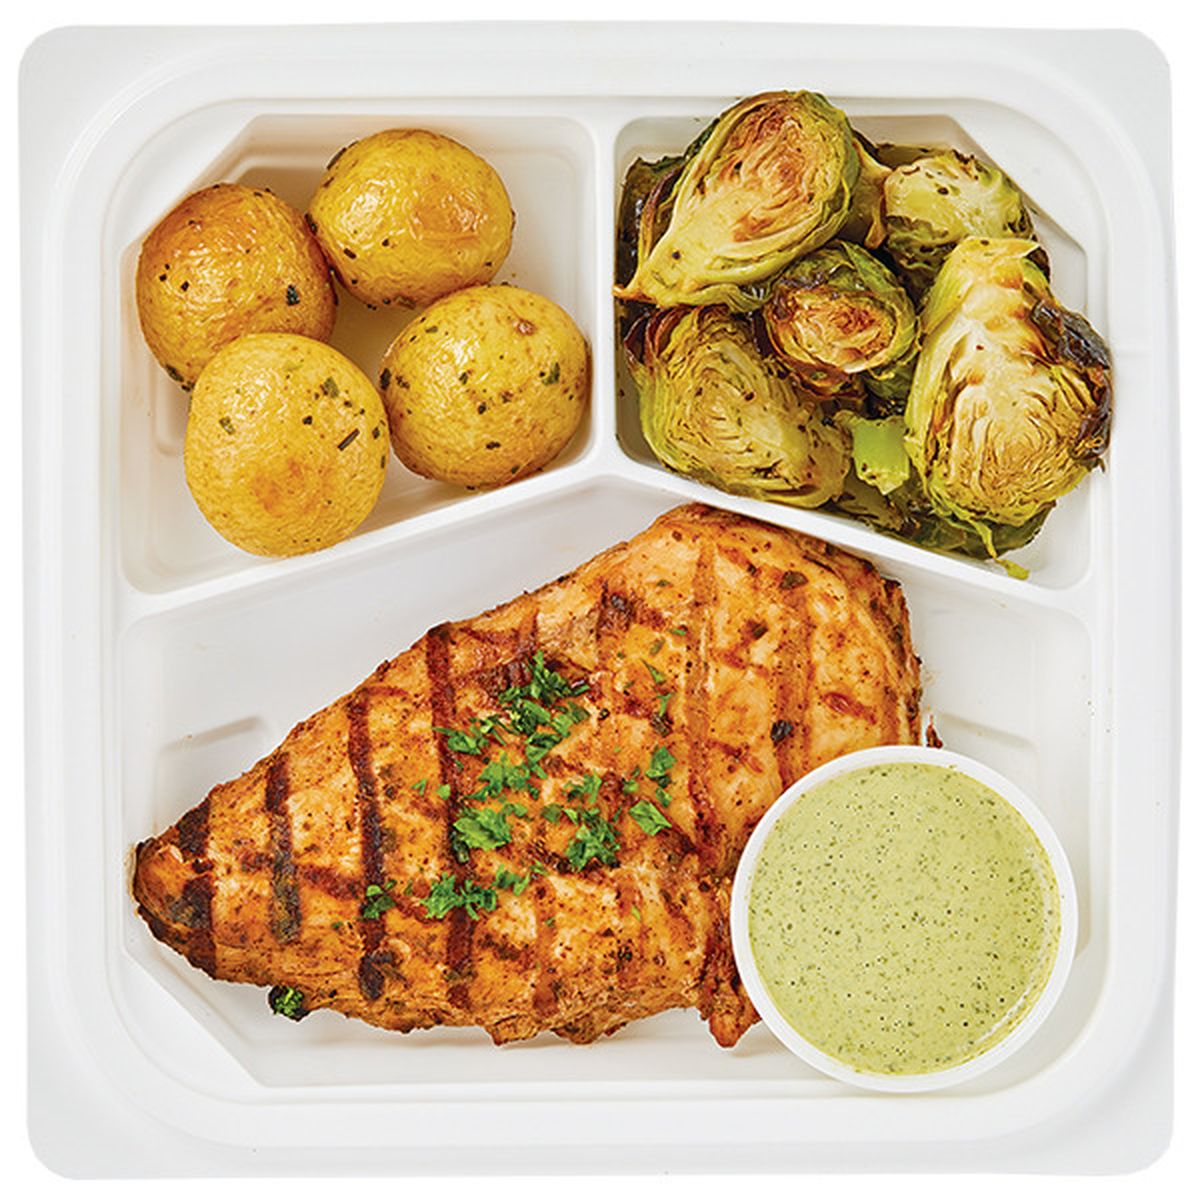 Calories in Wegmans Peruvian-Style Chicken Raised without Antibiotics with Tuscan Roasted Potatoes & Roasted Brussels Sprouts